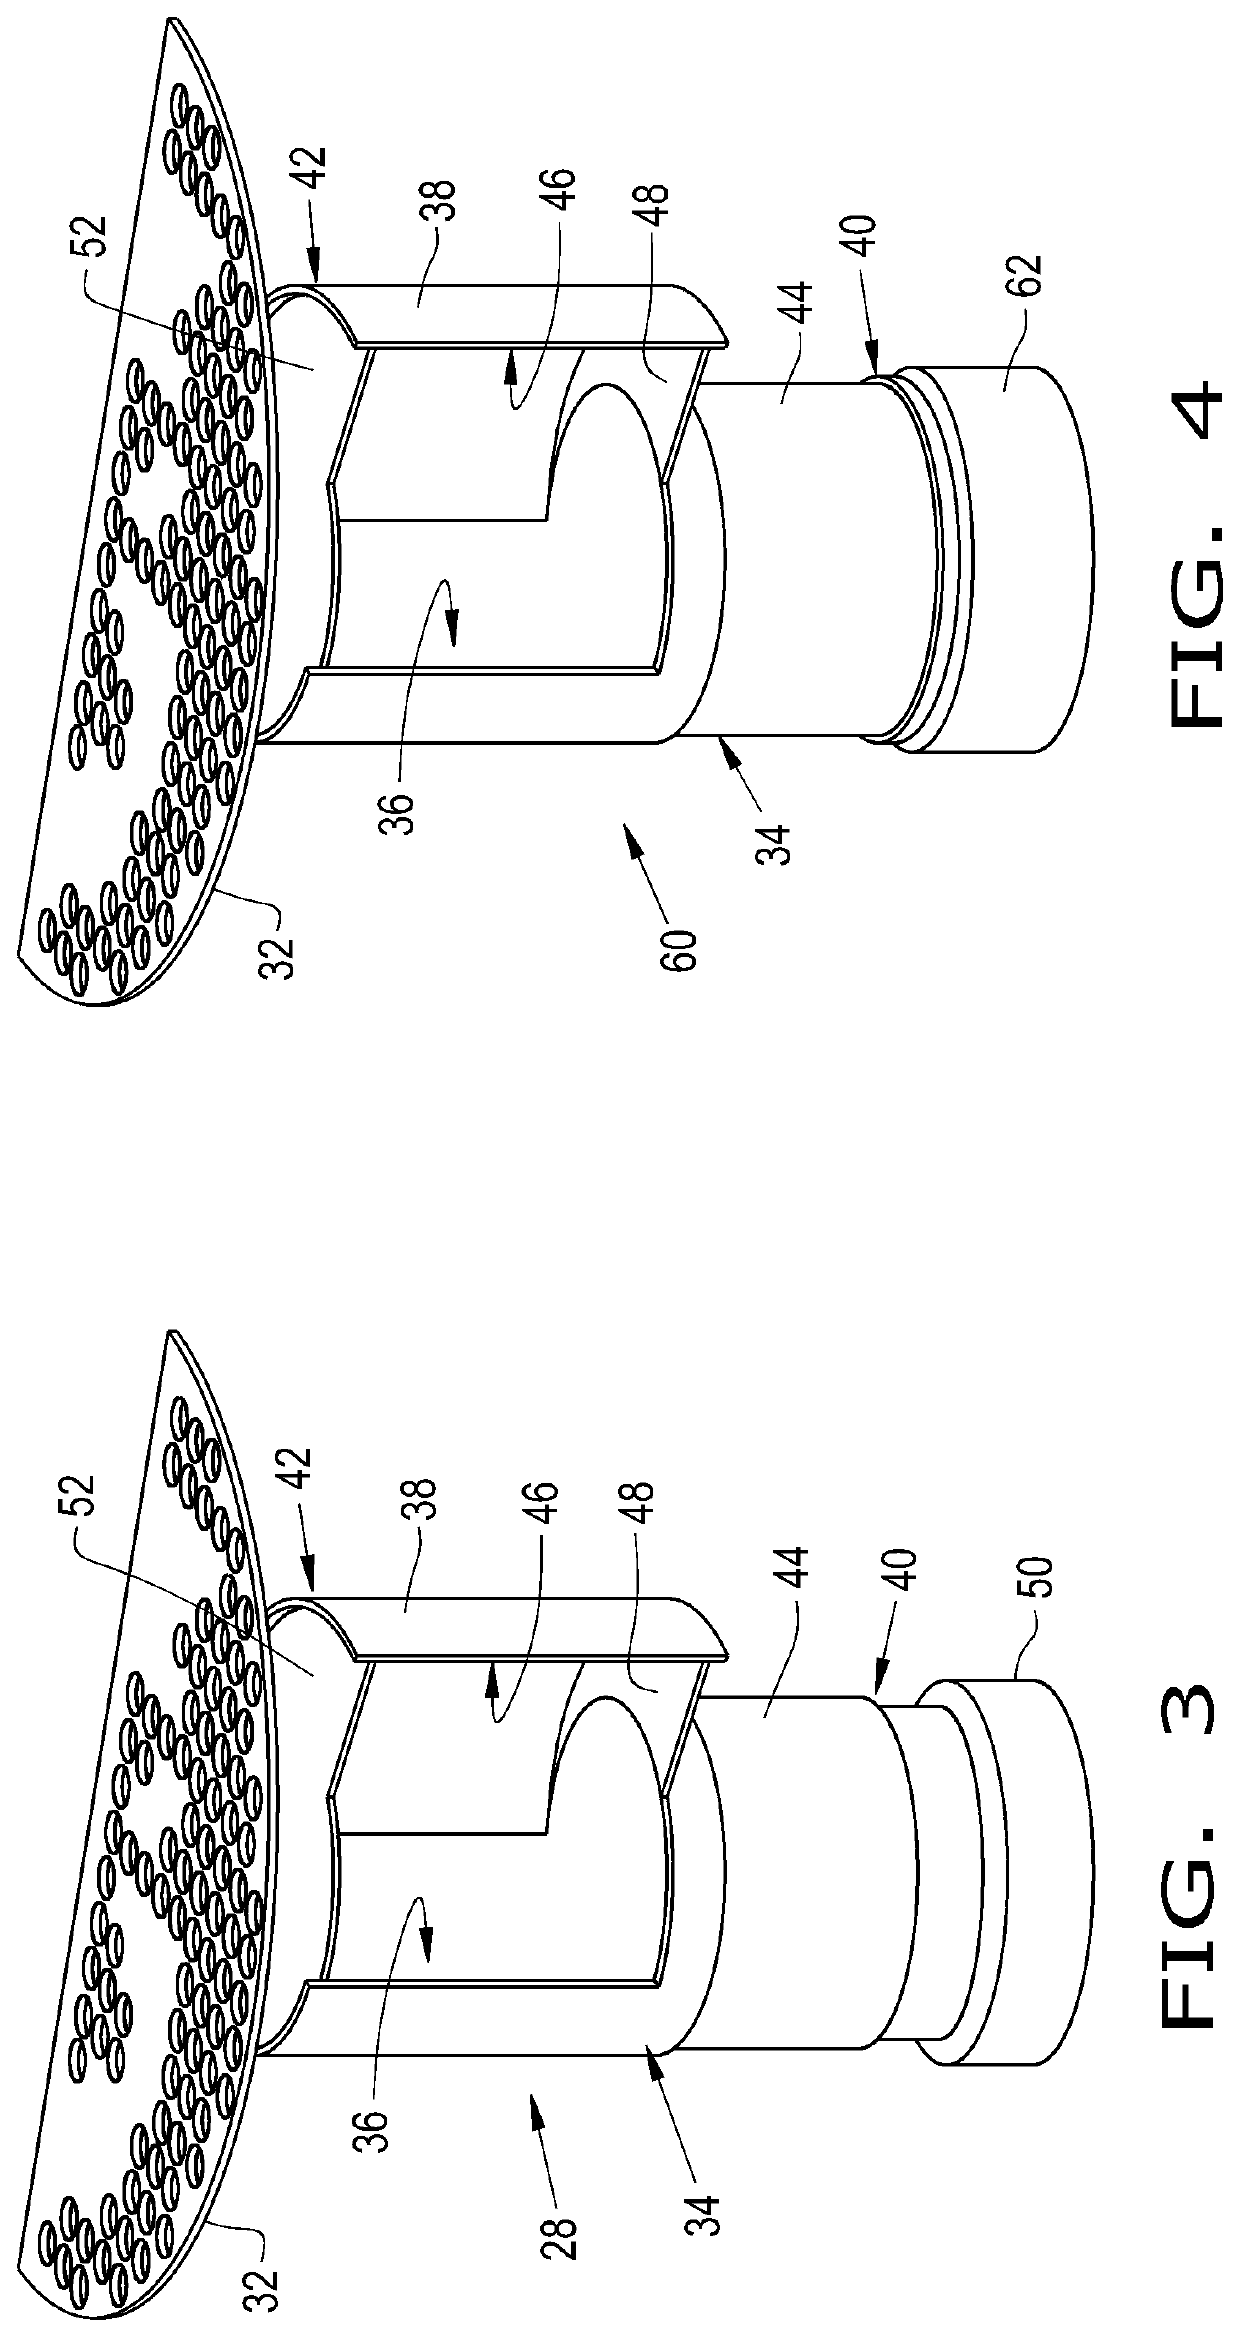 Exhaust aftertreatment system with scooped inlet